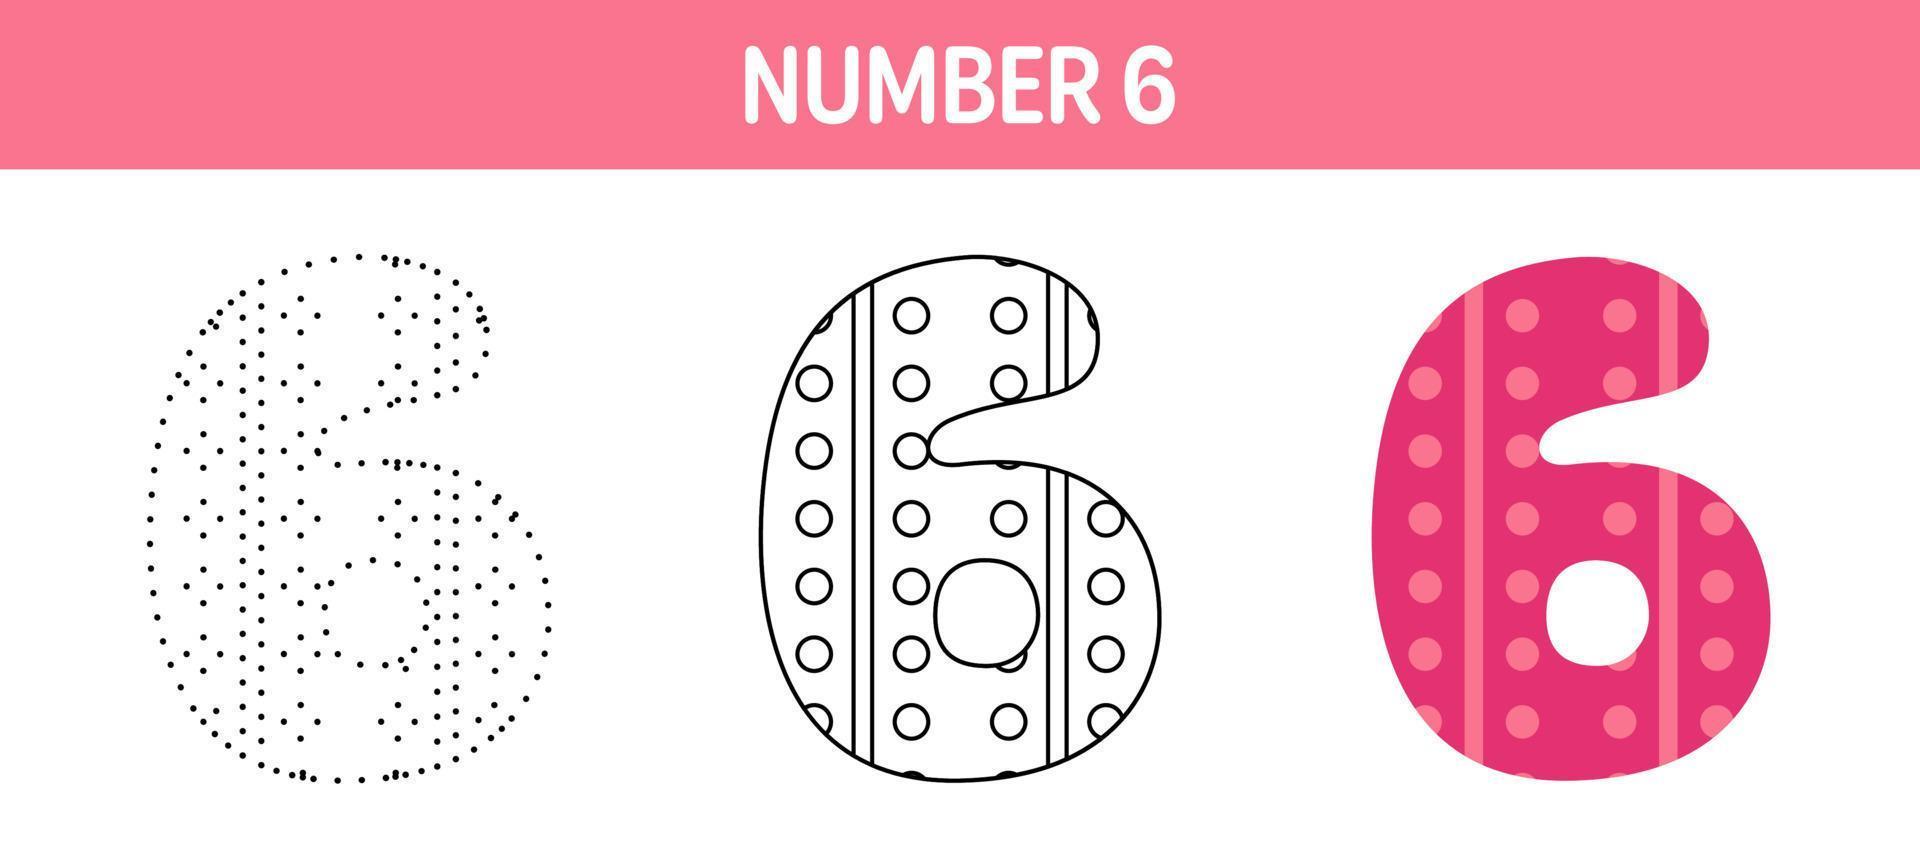 Number 6 tracing and coloring worksheet for kids vector